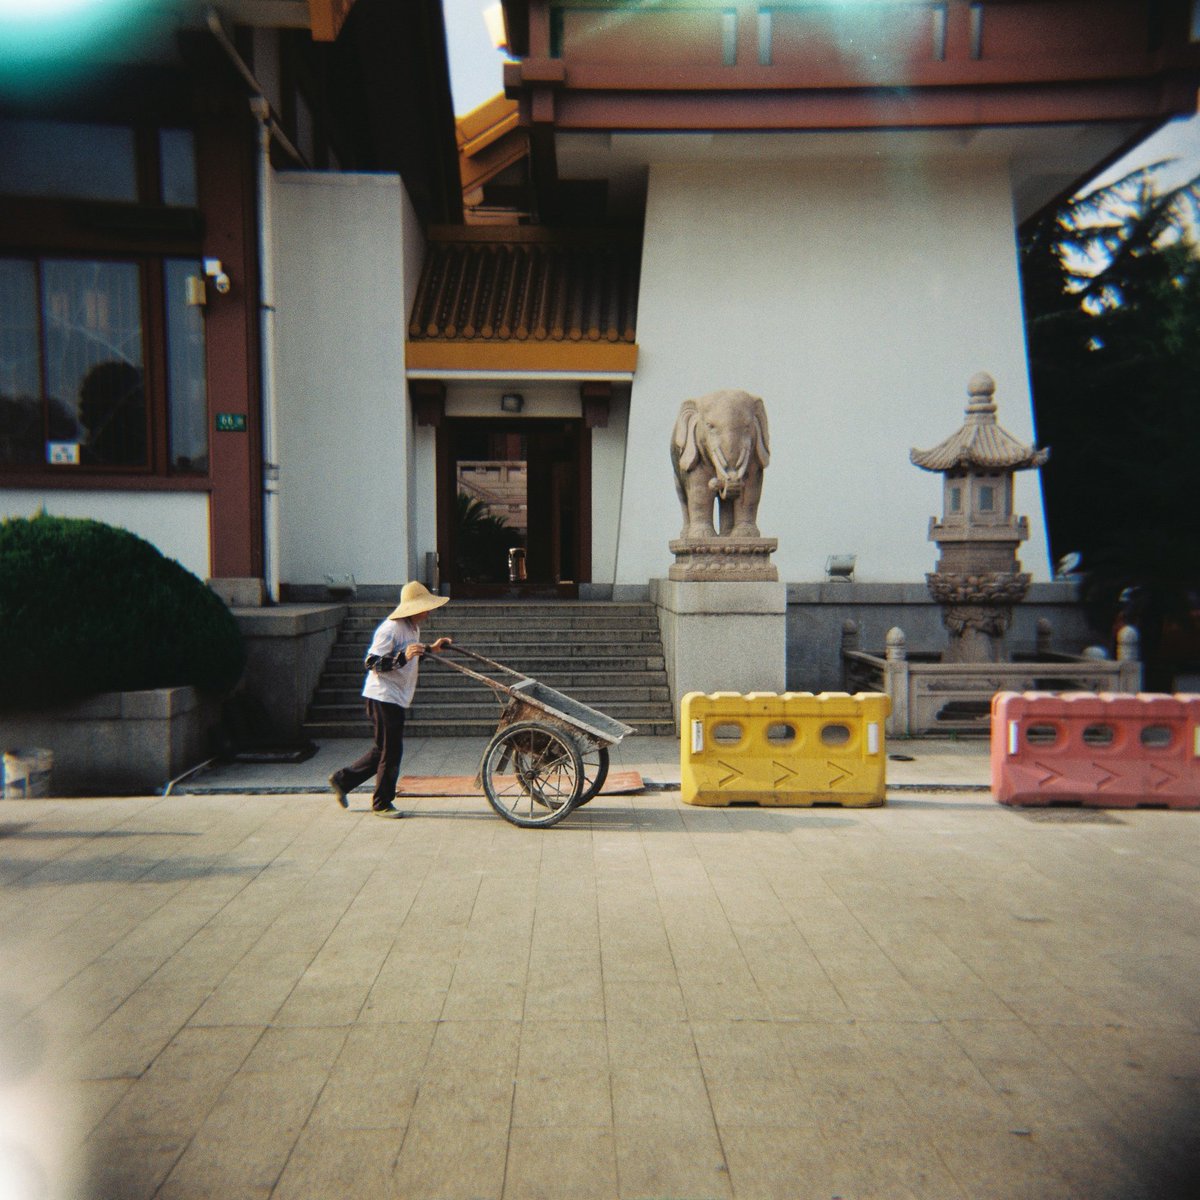 @Littlest_Holga Right, time to add some colour up in here. Here's what the @Littlest_Holga painted for me on some #lomography 100 at my local temple. #believeinfilm #holgaweek innit